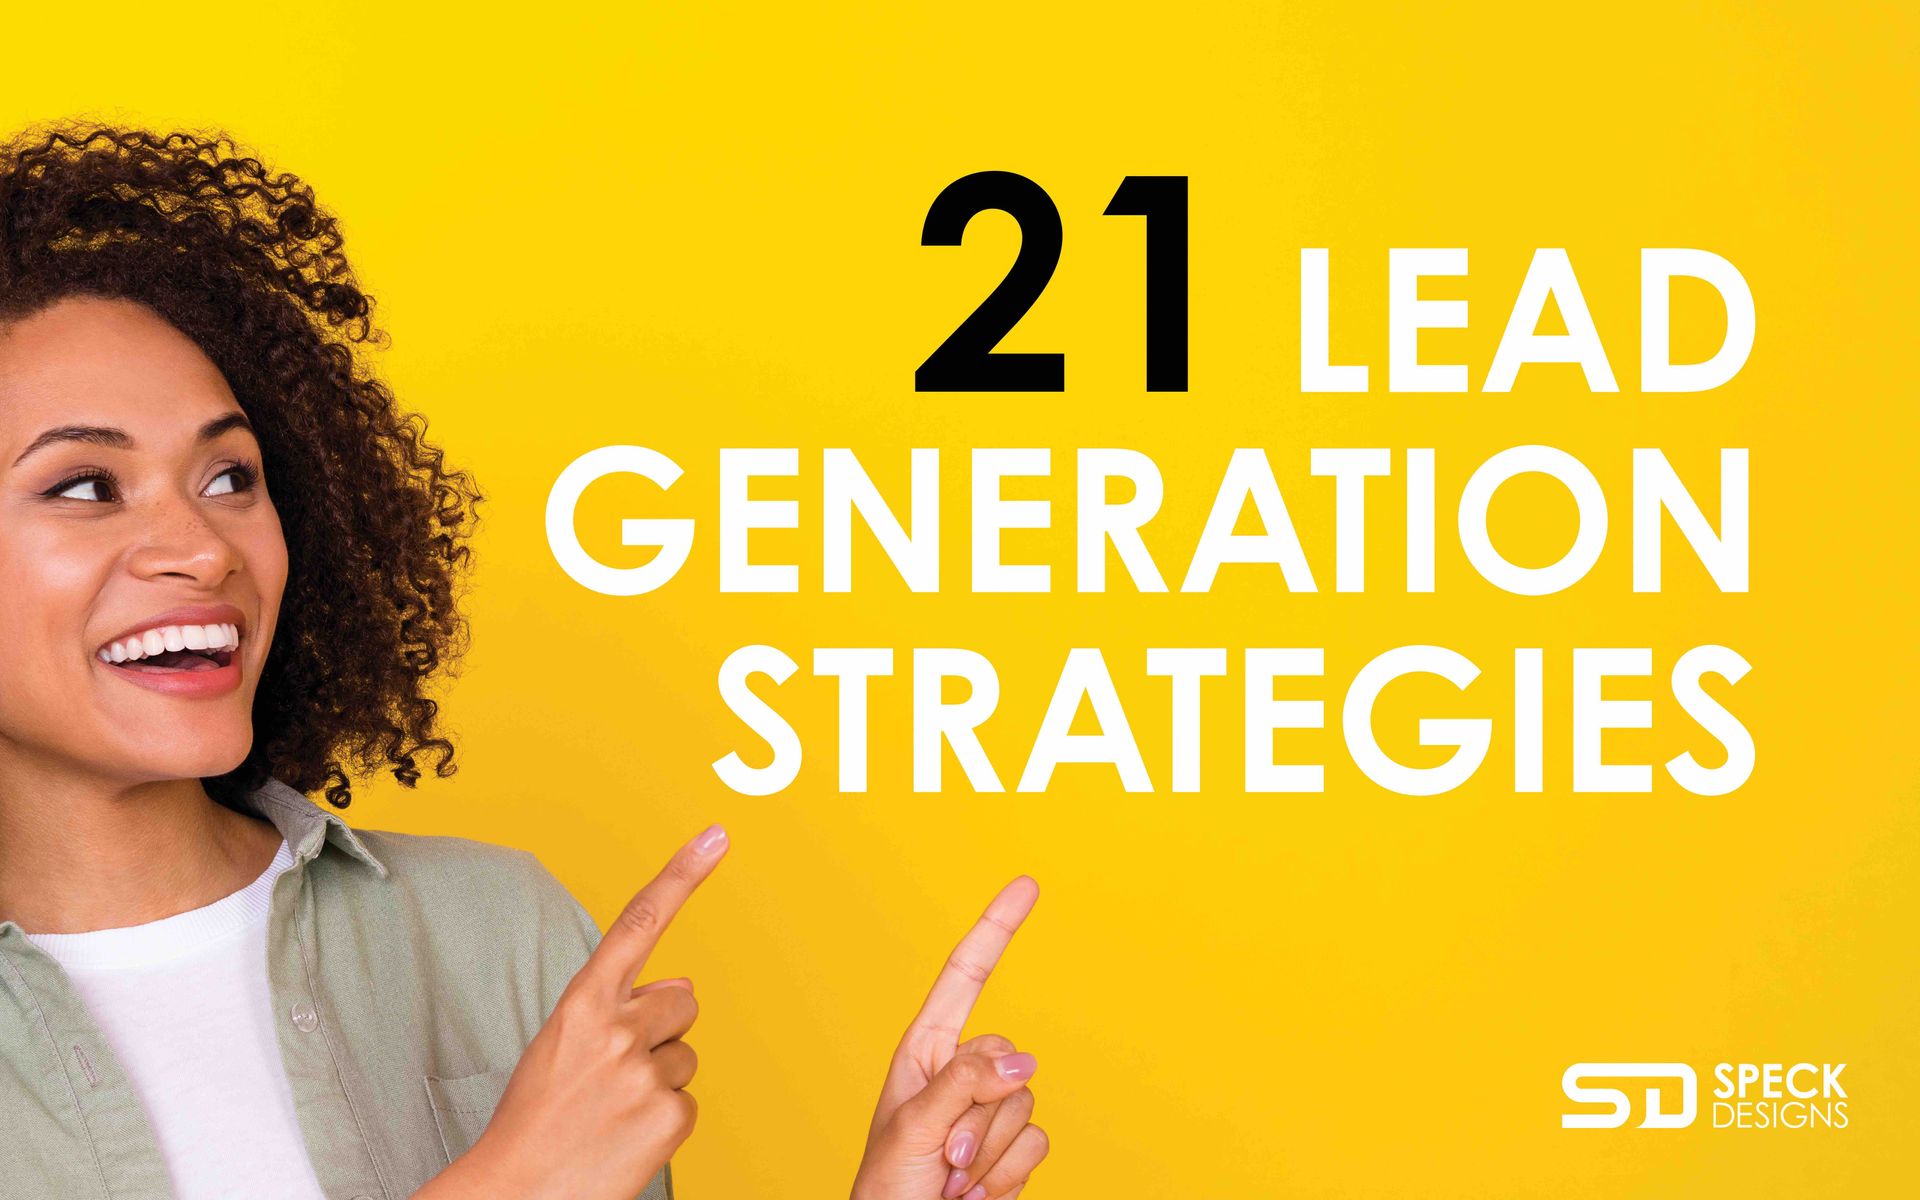 lady pointing at text that says 21 lead generation strategies